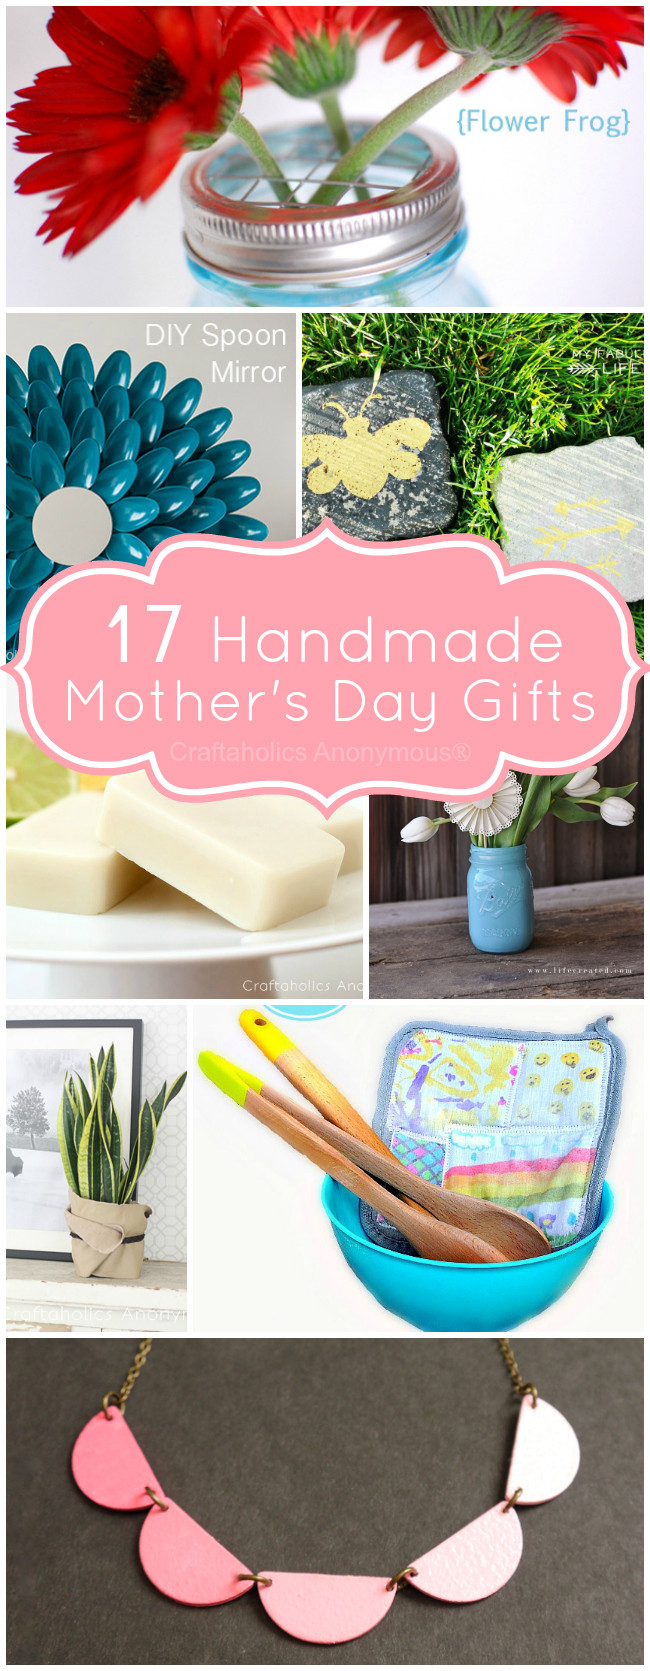 Mothers Day Handmade Gifts
 Craftaholics Anonymous